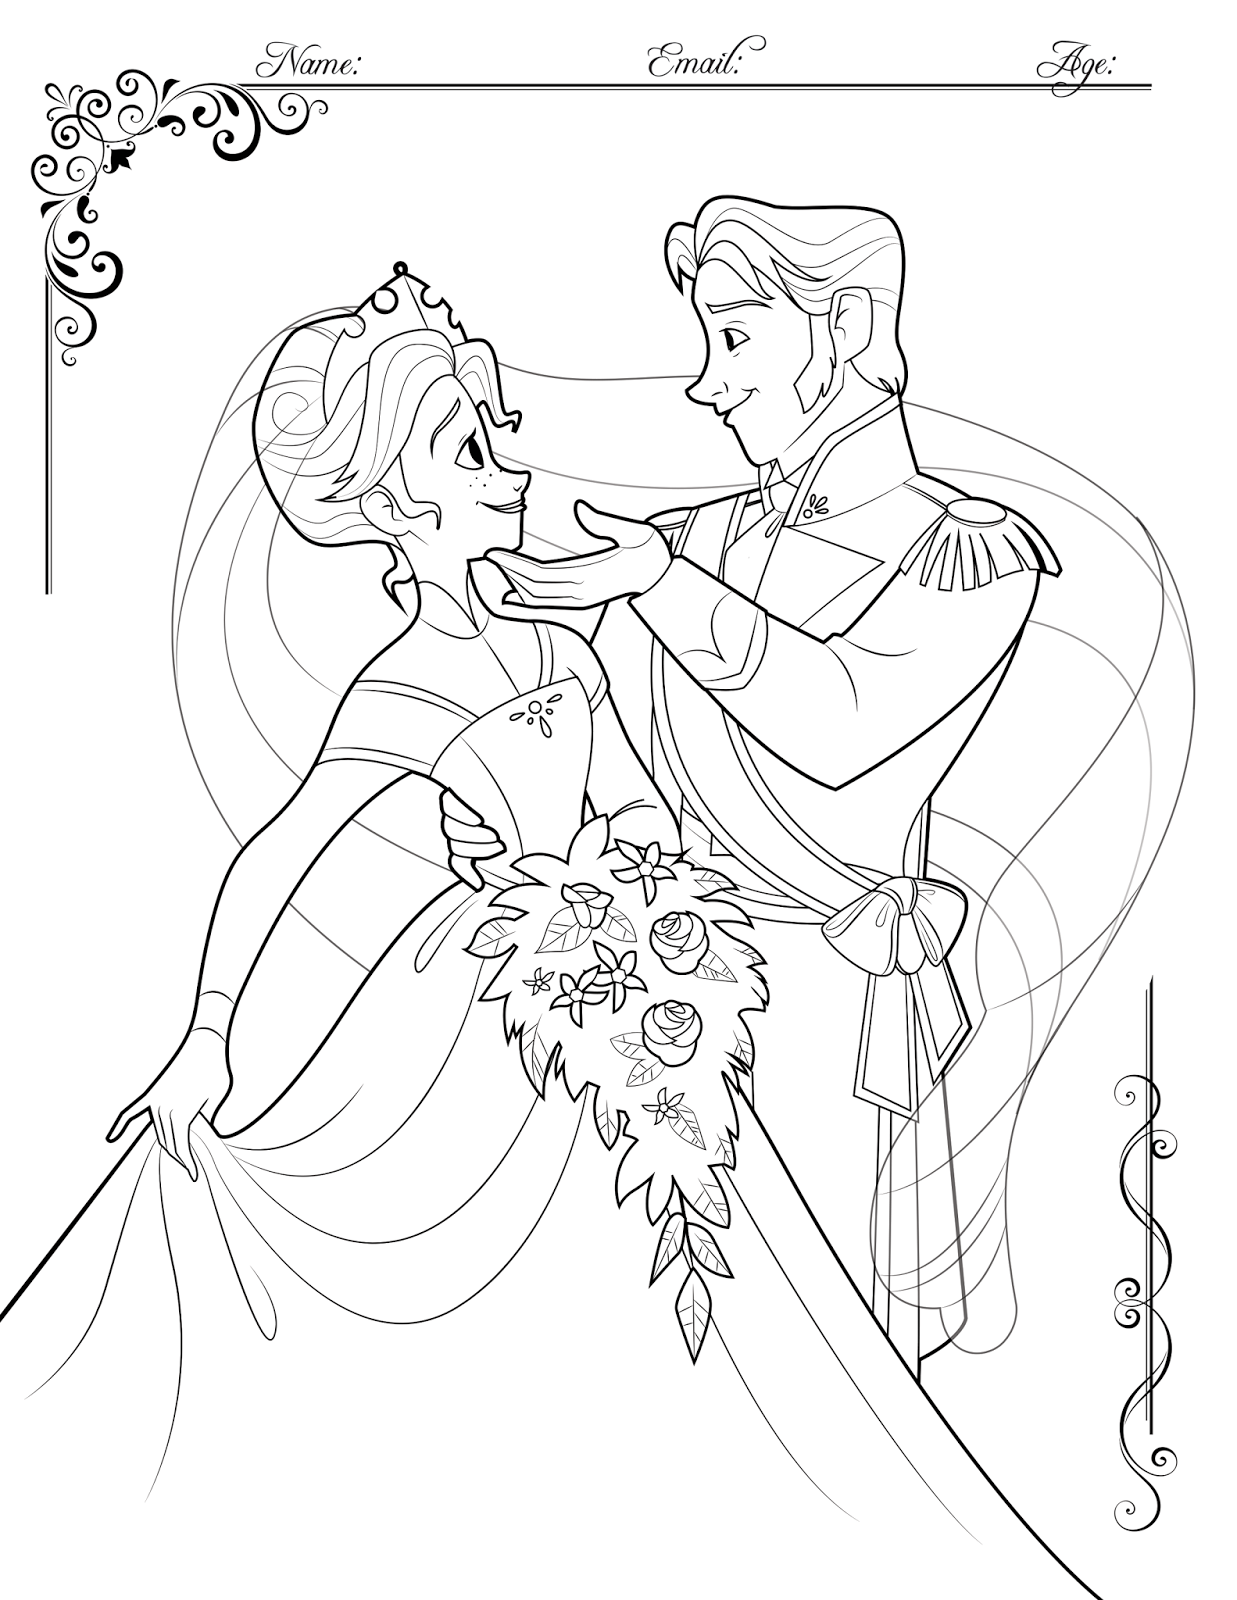 Disney Frozen Coloring Pages Free ~ Instant Knowledge